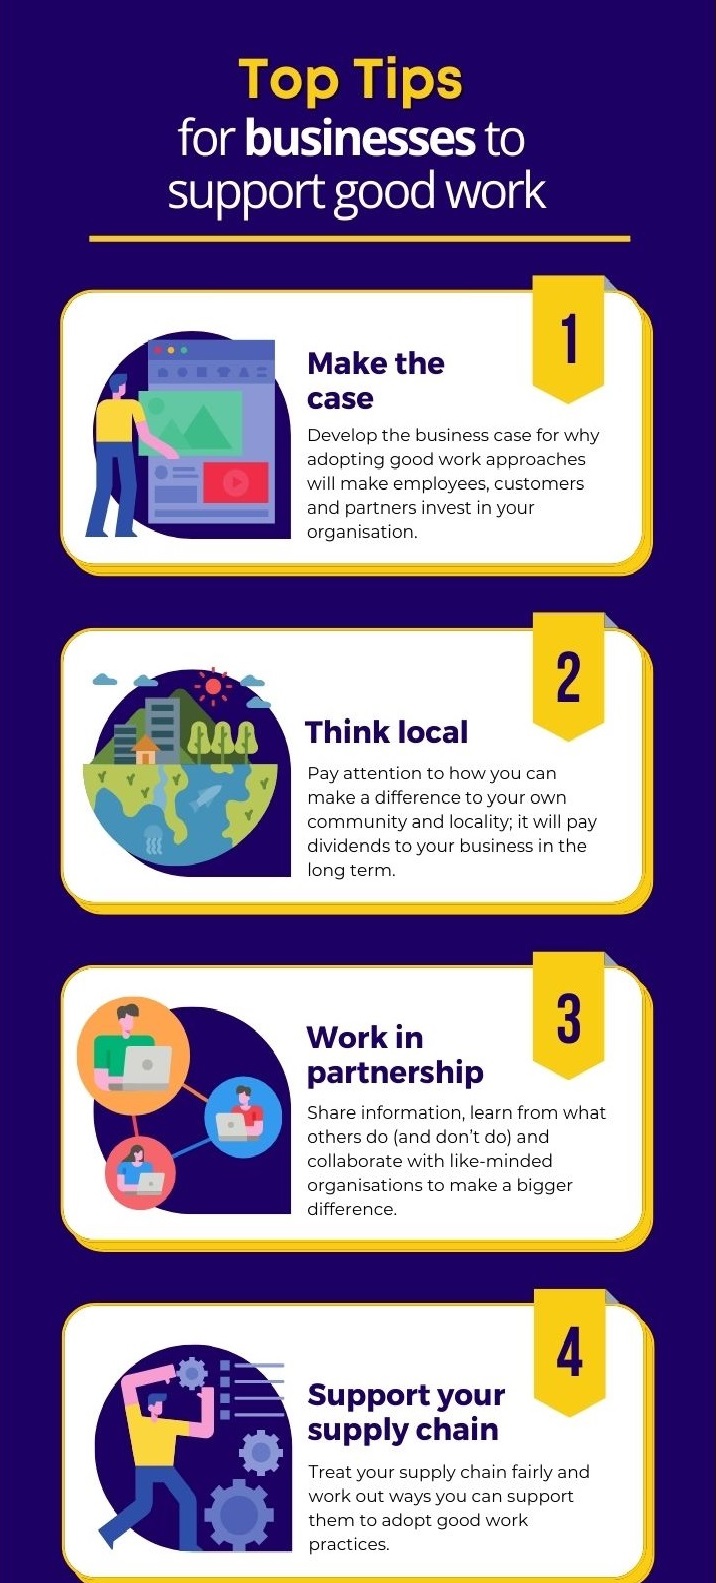 Top tips for businesses to support good work: make the case, think local, work in partnership and support your supply chain